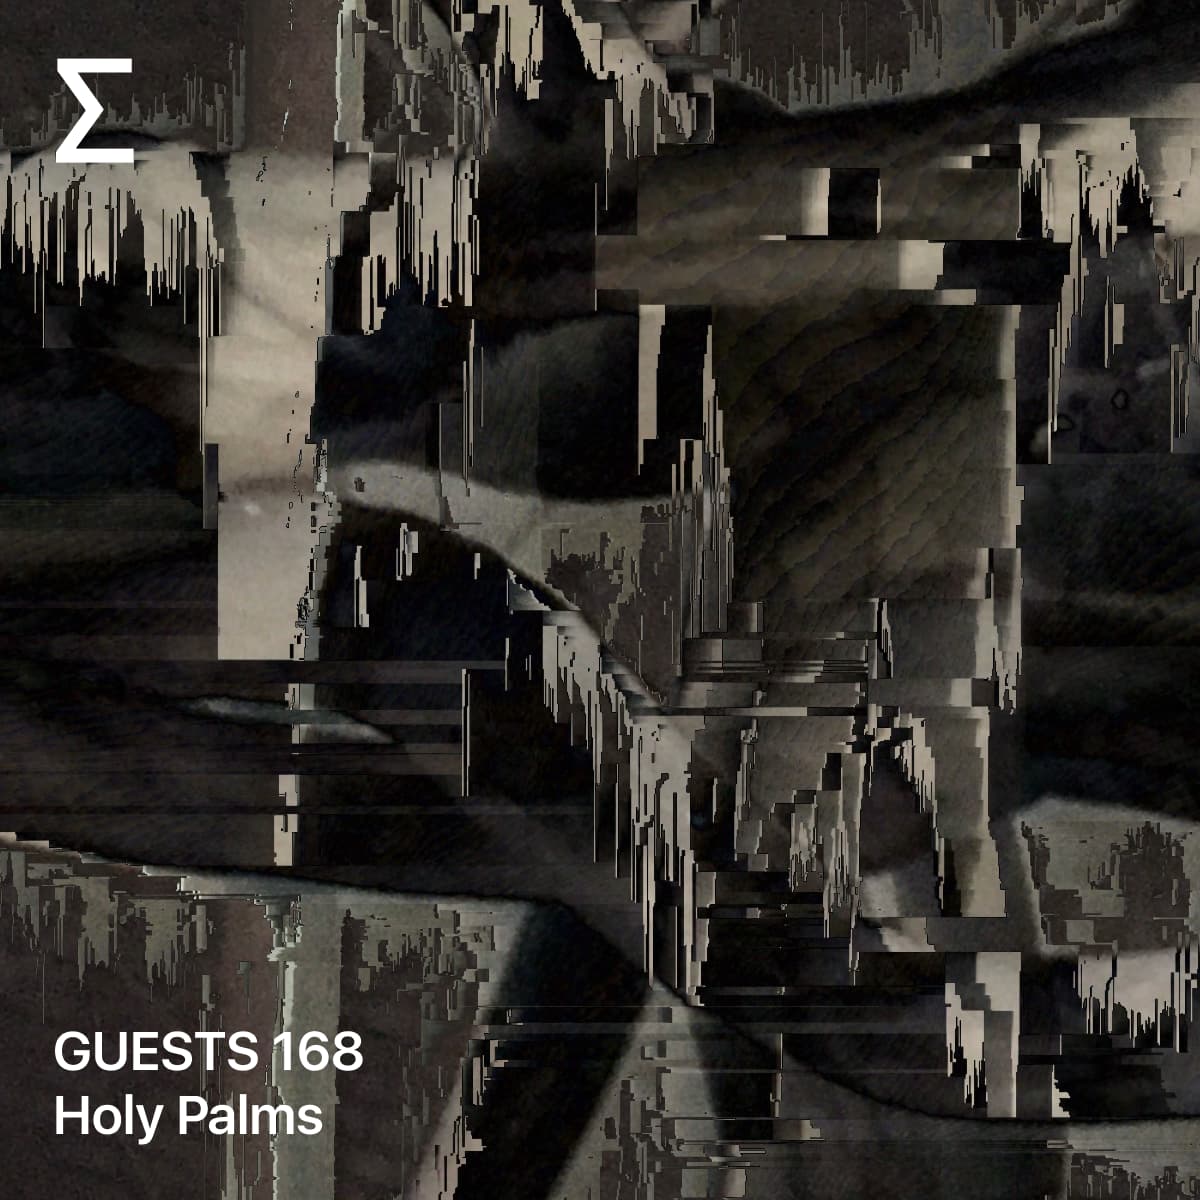 GUESTS 168 – Holy Palms